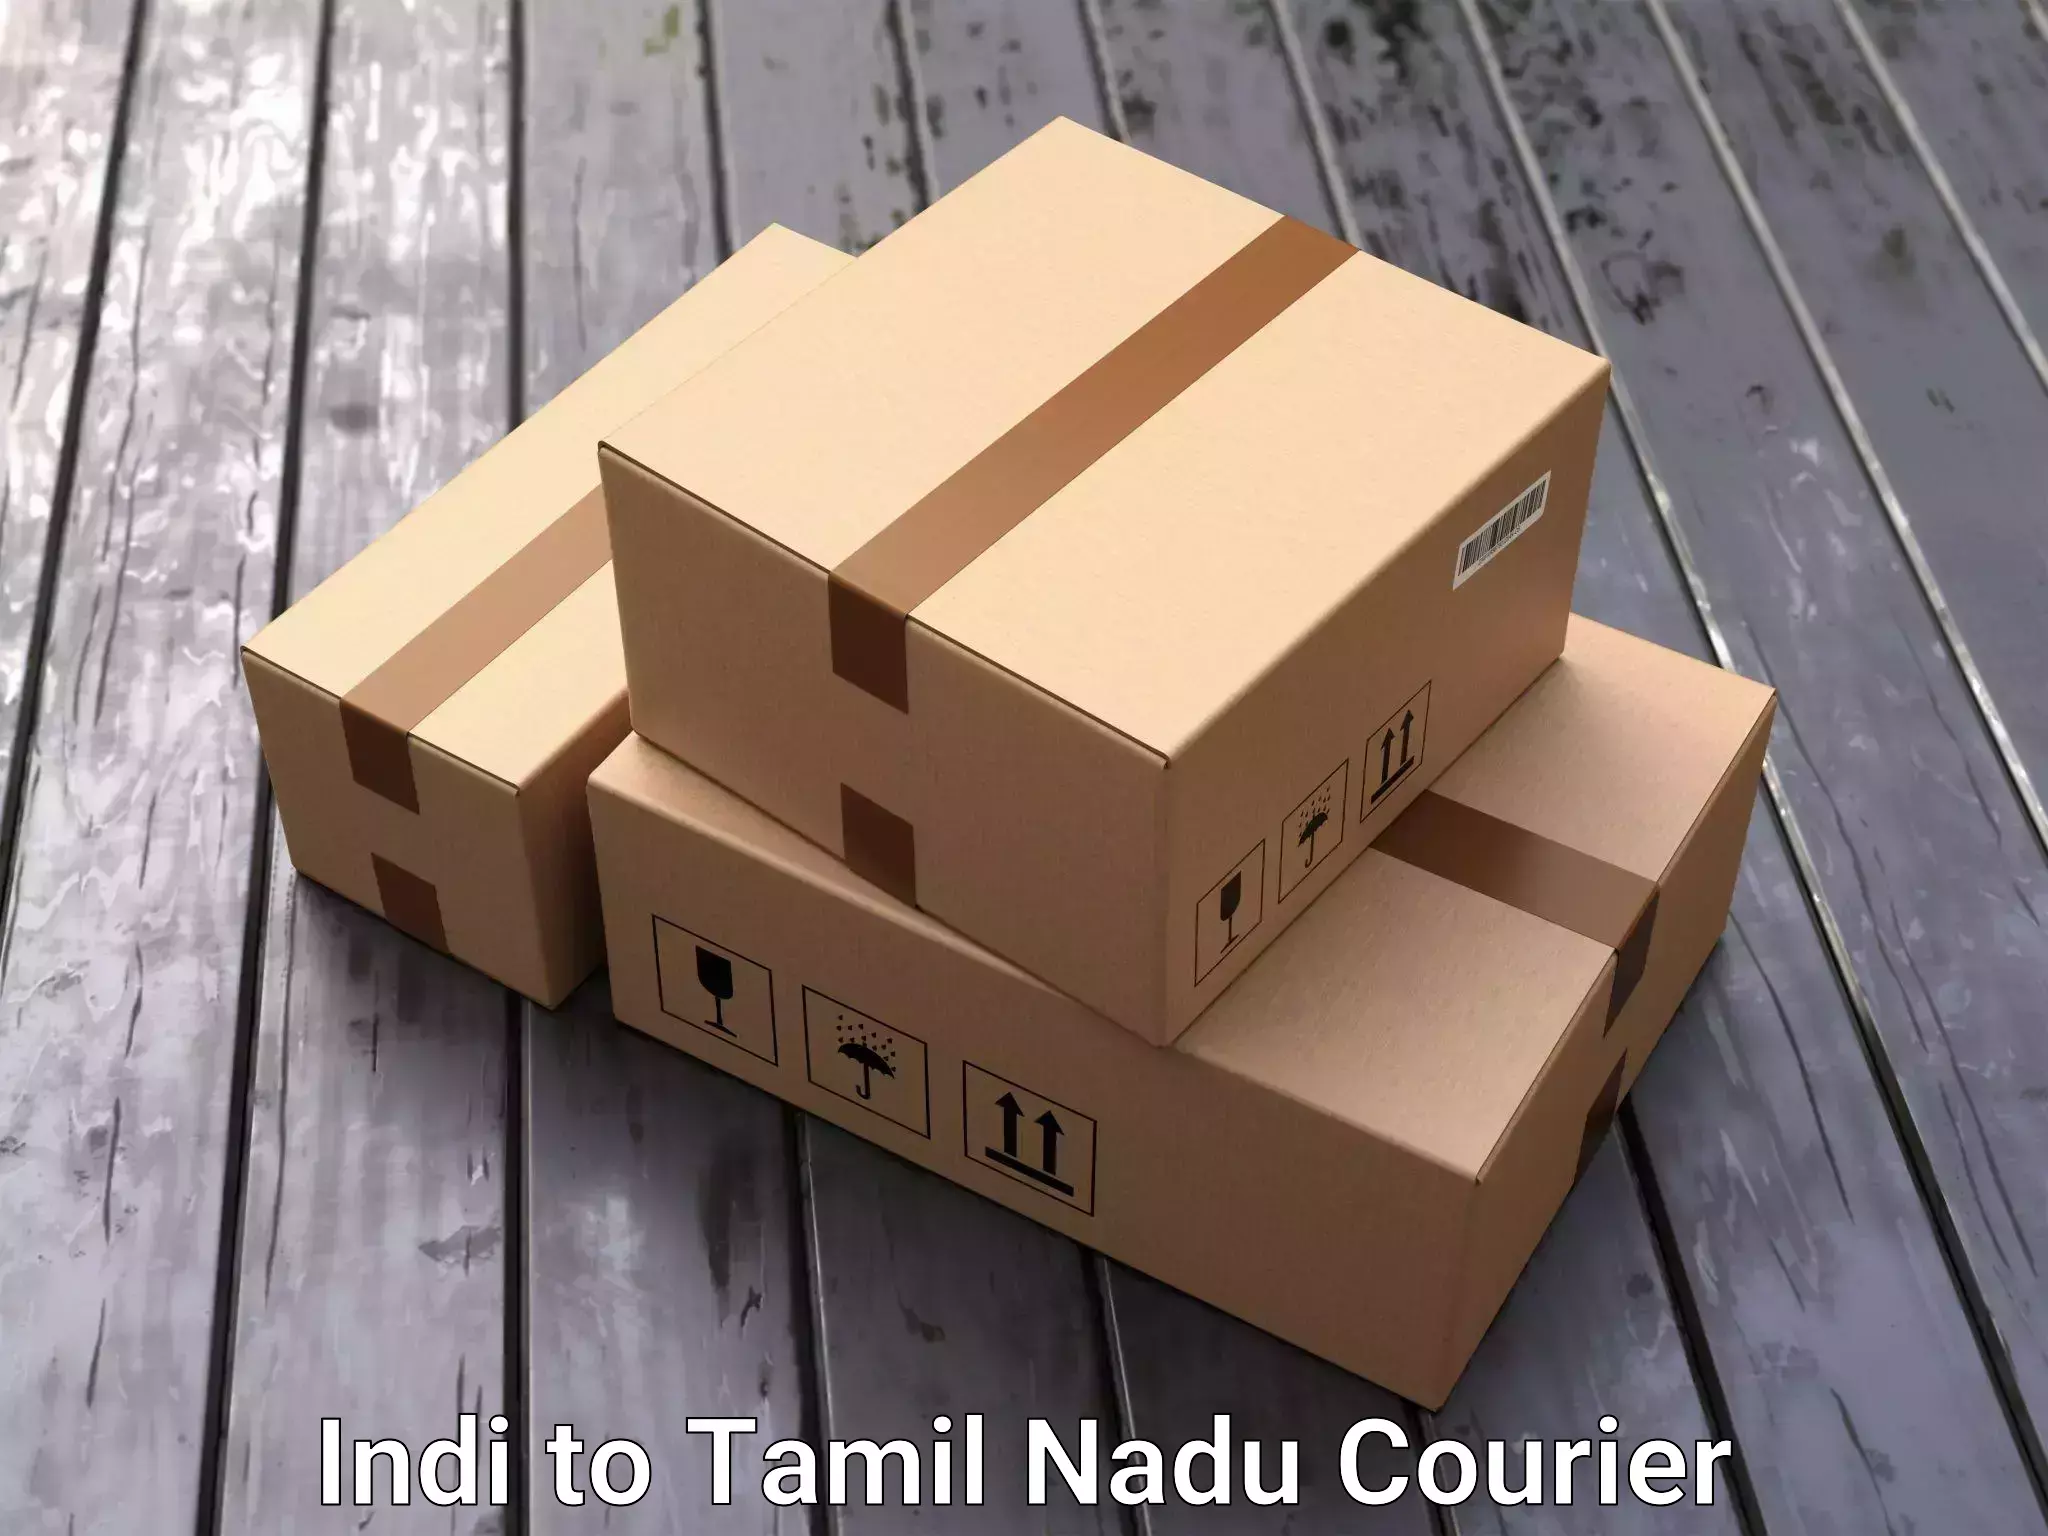 Trusted relocation experts Indi to Tamil Nadu